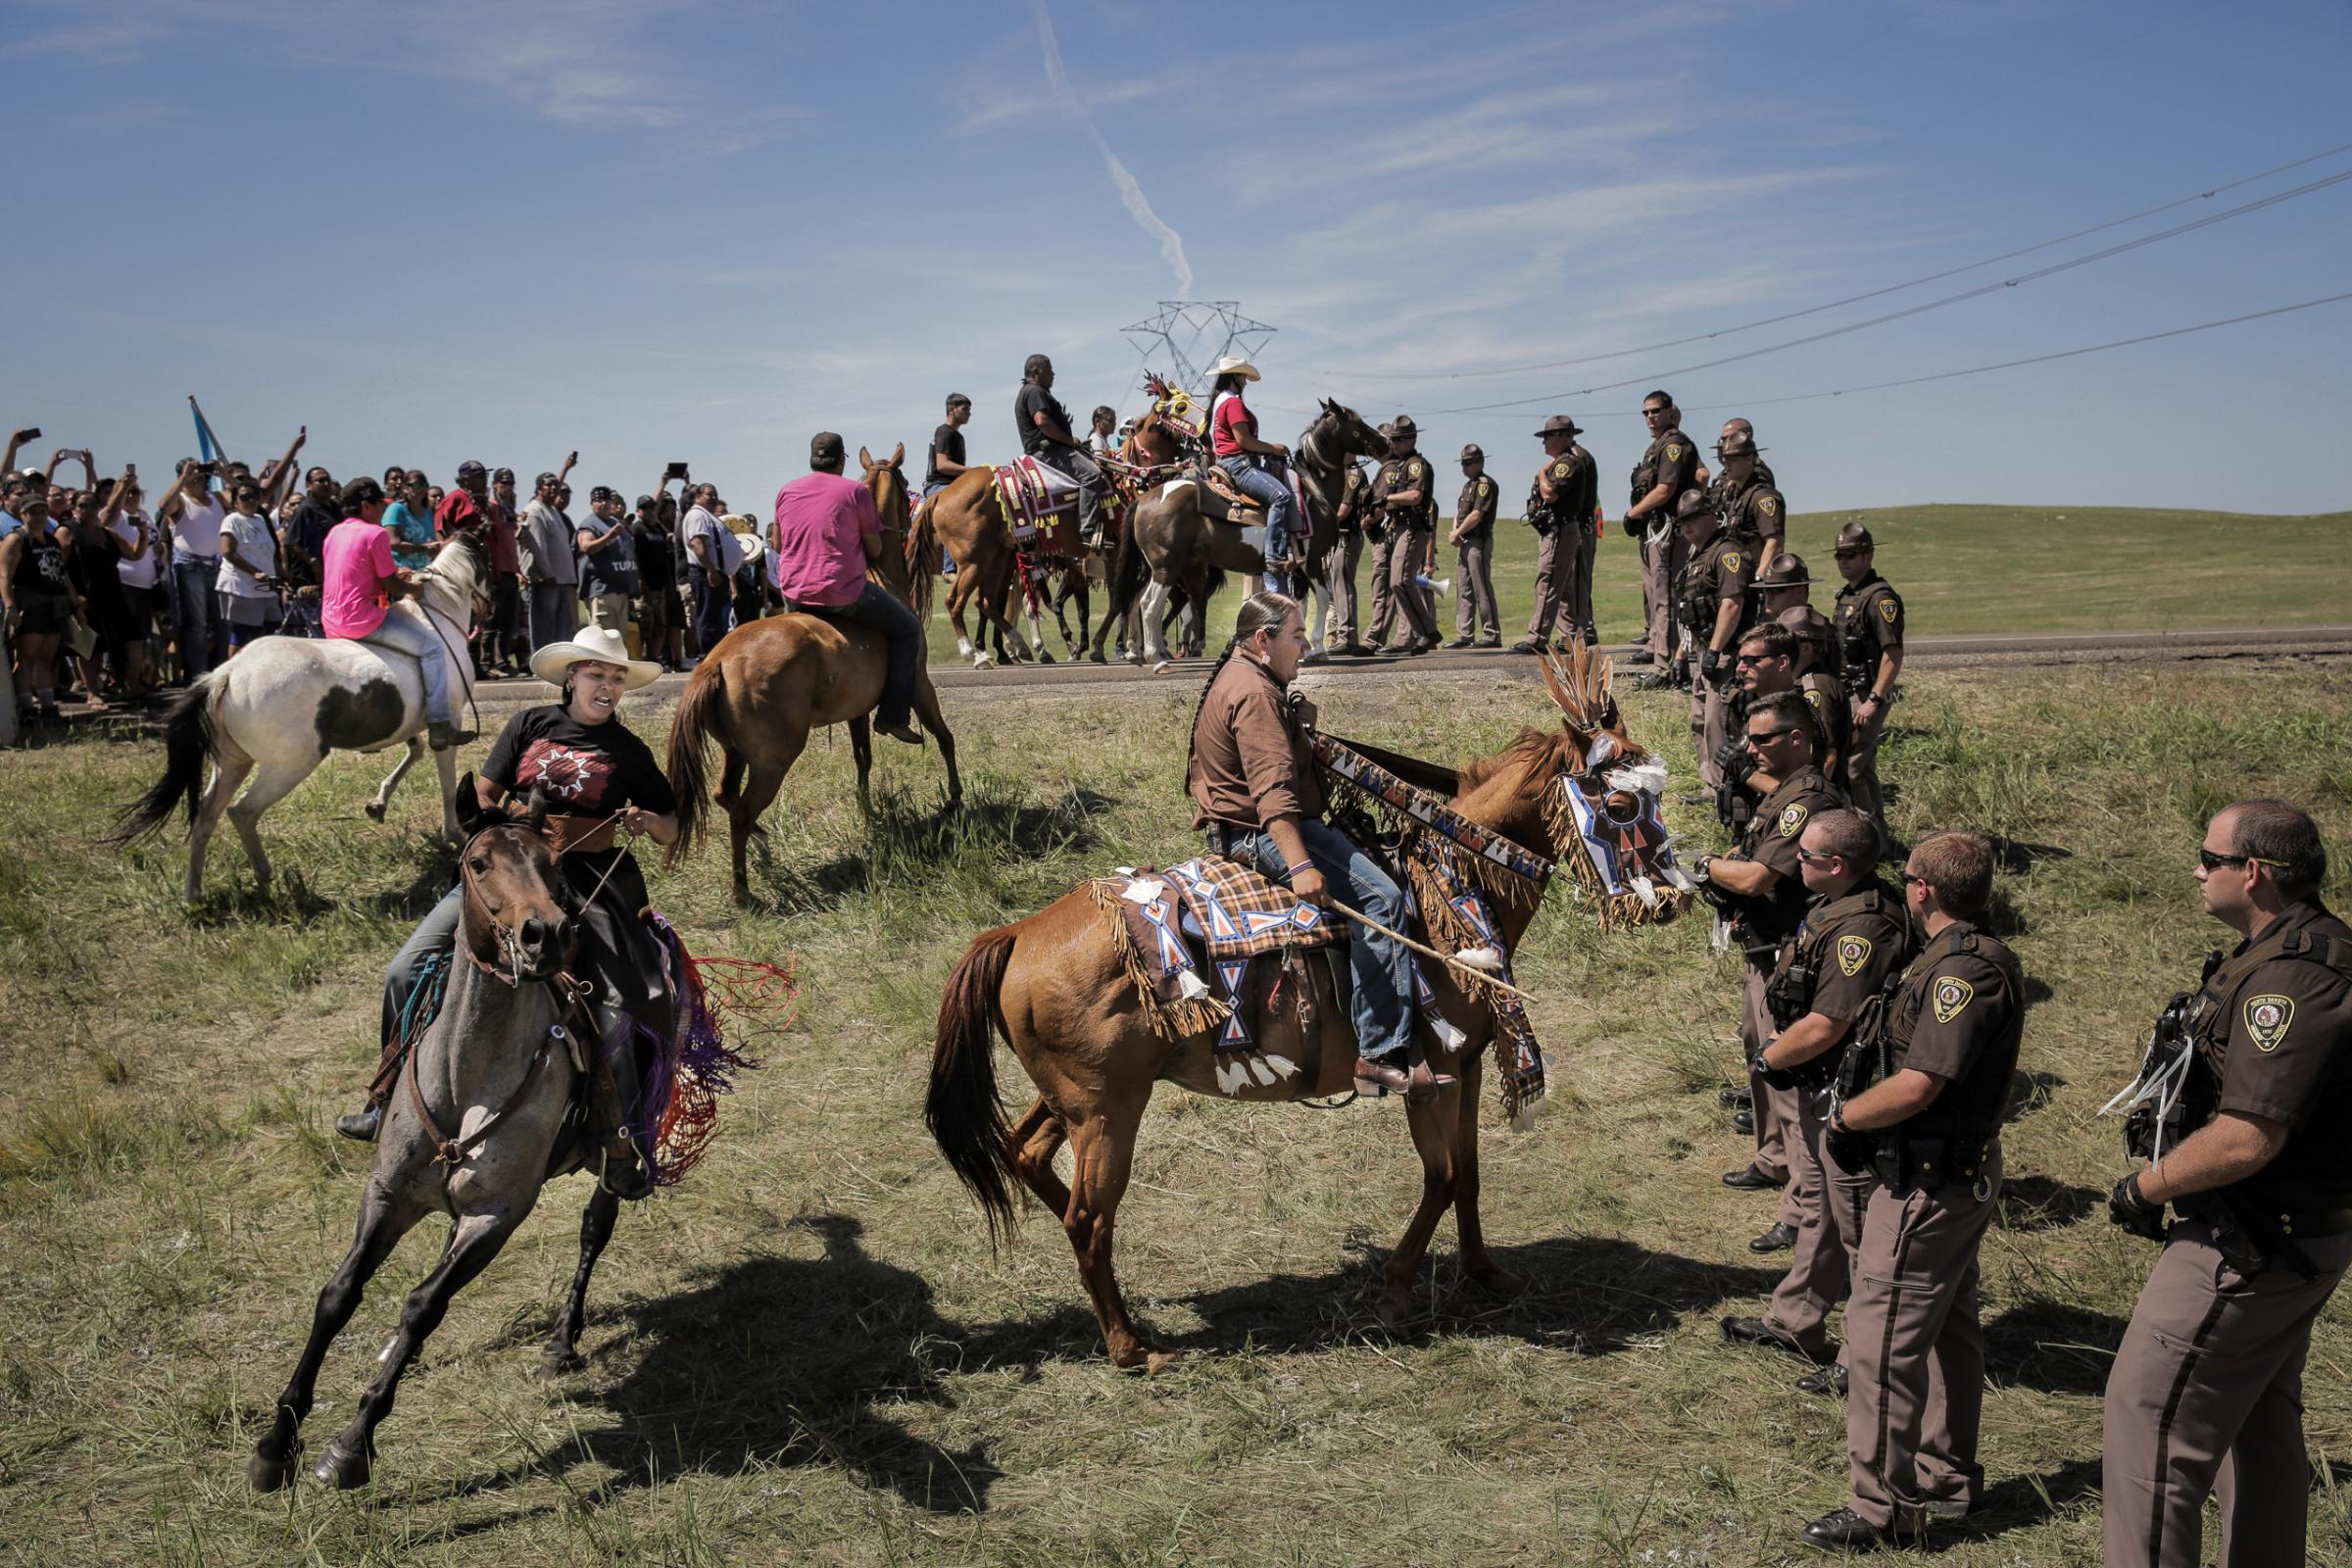 Lakota riders Alex Romero-Frederick (left) and Greg Grey Cloud (right) confront a line of North Dakota State Police the day that construction crews began work on the Dakota Access Pipeline just outside of the Standing Rock Reservation, on Aug. 15, 2016. While the riders did push the police line back after a tense standoff, the display was part of a ceremonial horse introduction meant to be peaceful. For the Standing Rock Lakota, the pipeline represents a major environmental and cultural threat, as well as a violation of treaty land.